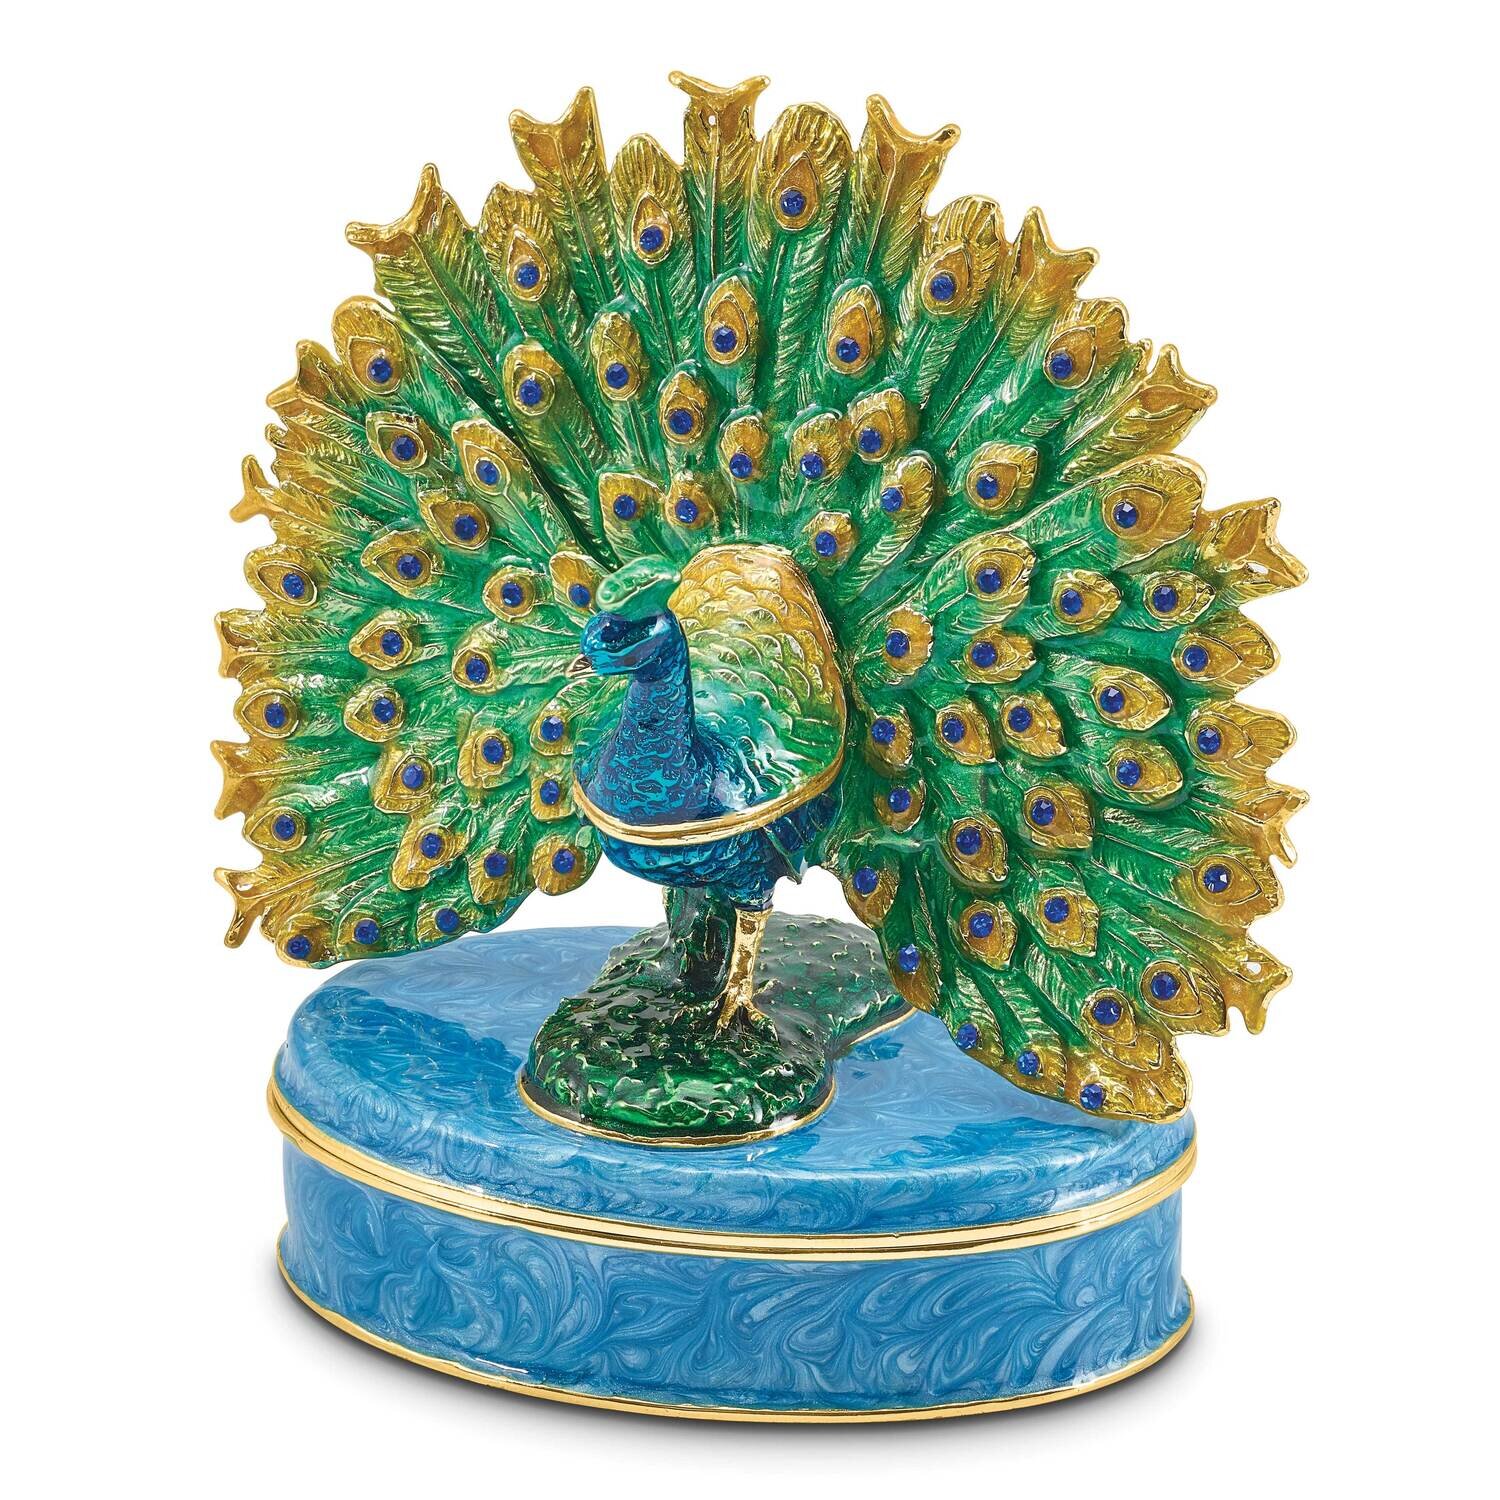 By Jere PERO Peacock on Oval Trinket Box with Matching 18 Inch Necklace Pewter Bejeweled Crystals Gold-tone Enameled BJ4144